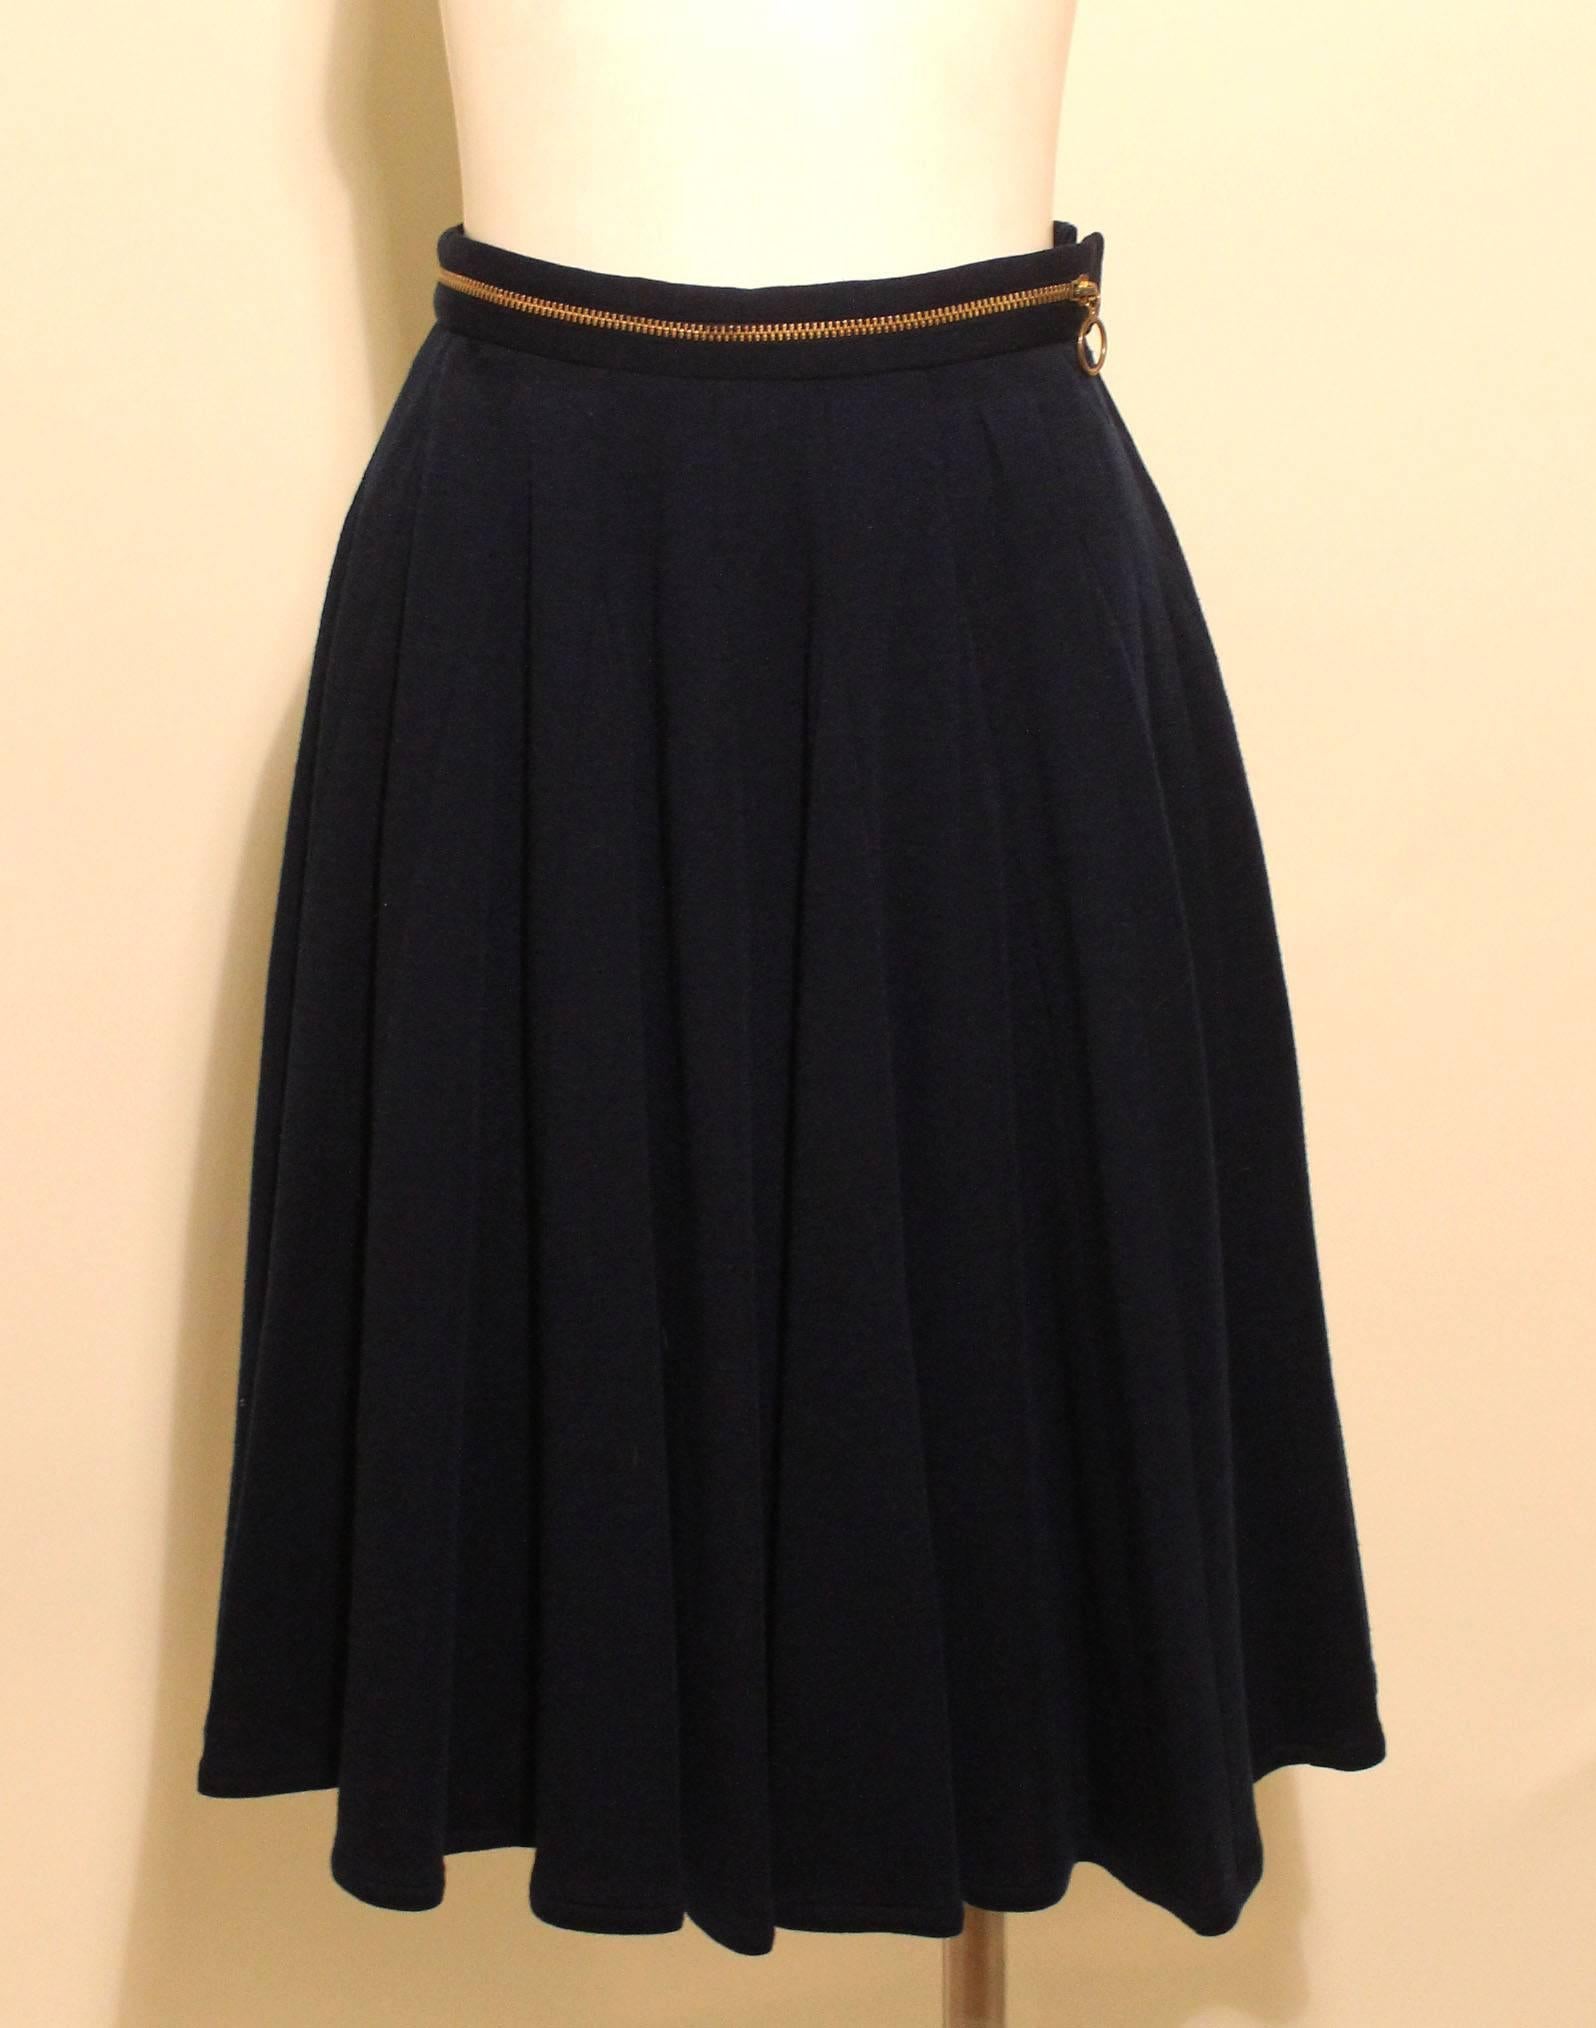 This beautiful navy Geoffrey Beene skirt has a clever design element with a zipper encircling the waistband. Its a fine wool and is completely lined.